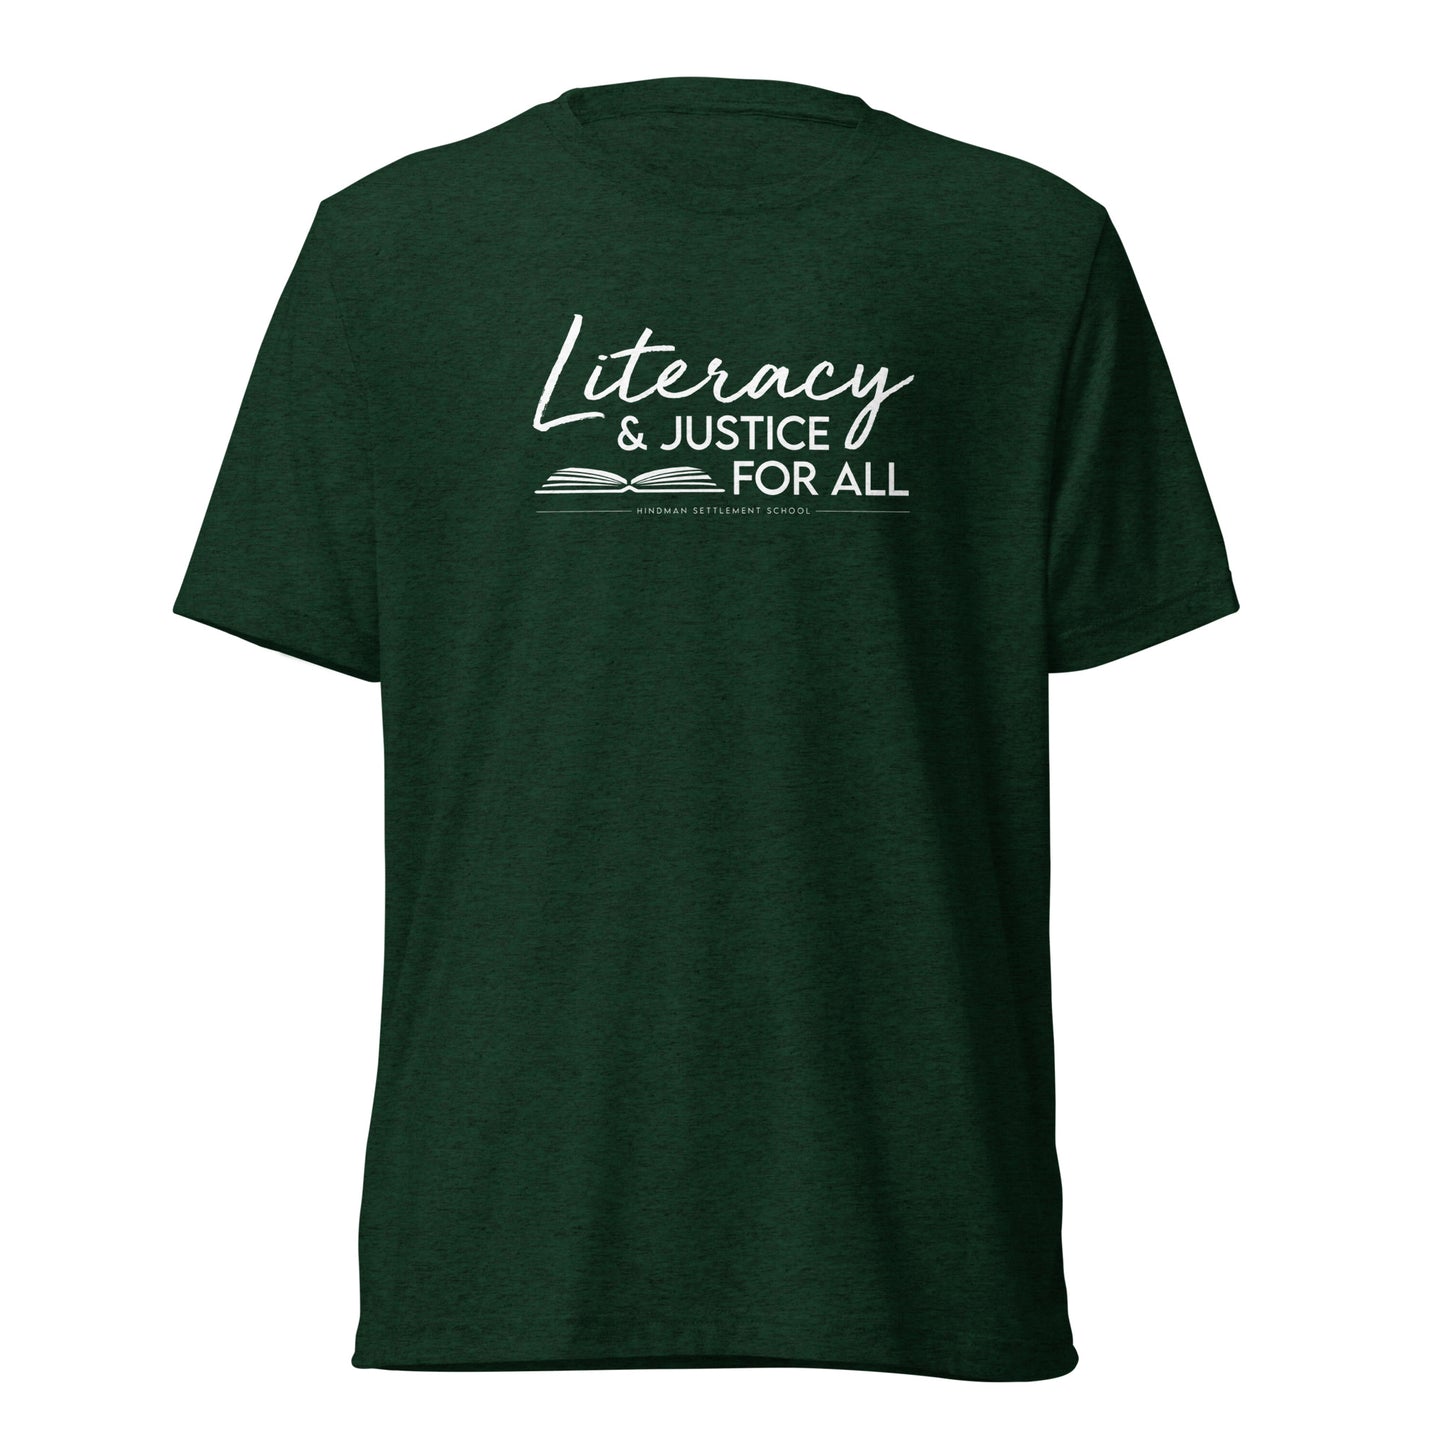 "Literacy & Justice For All" T-Shirt